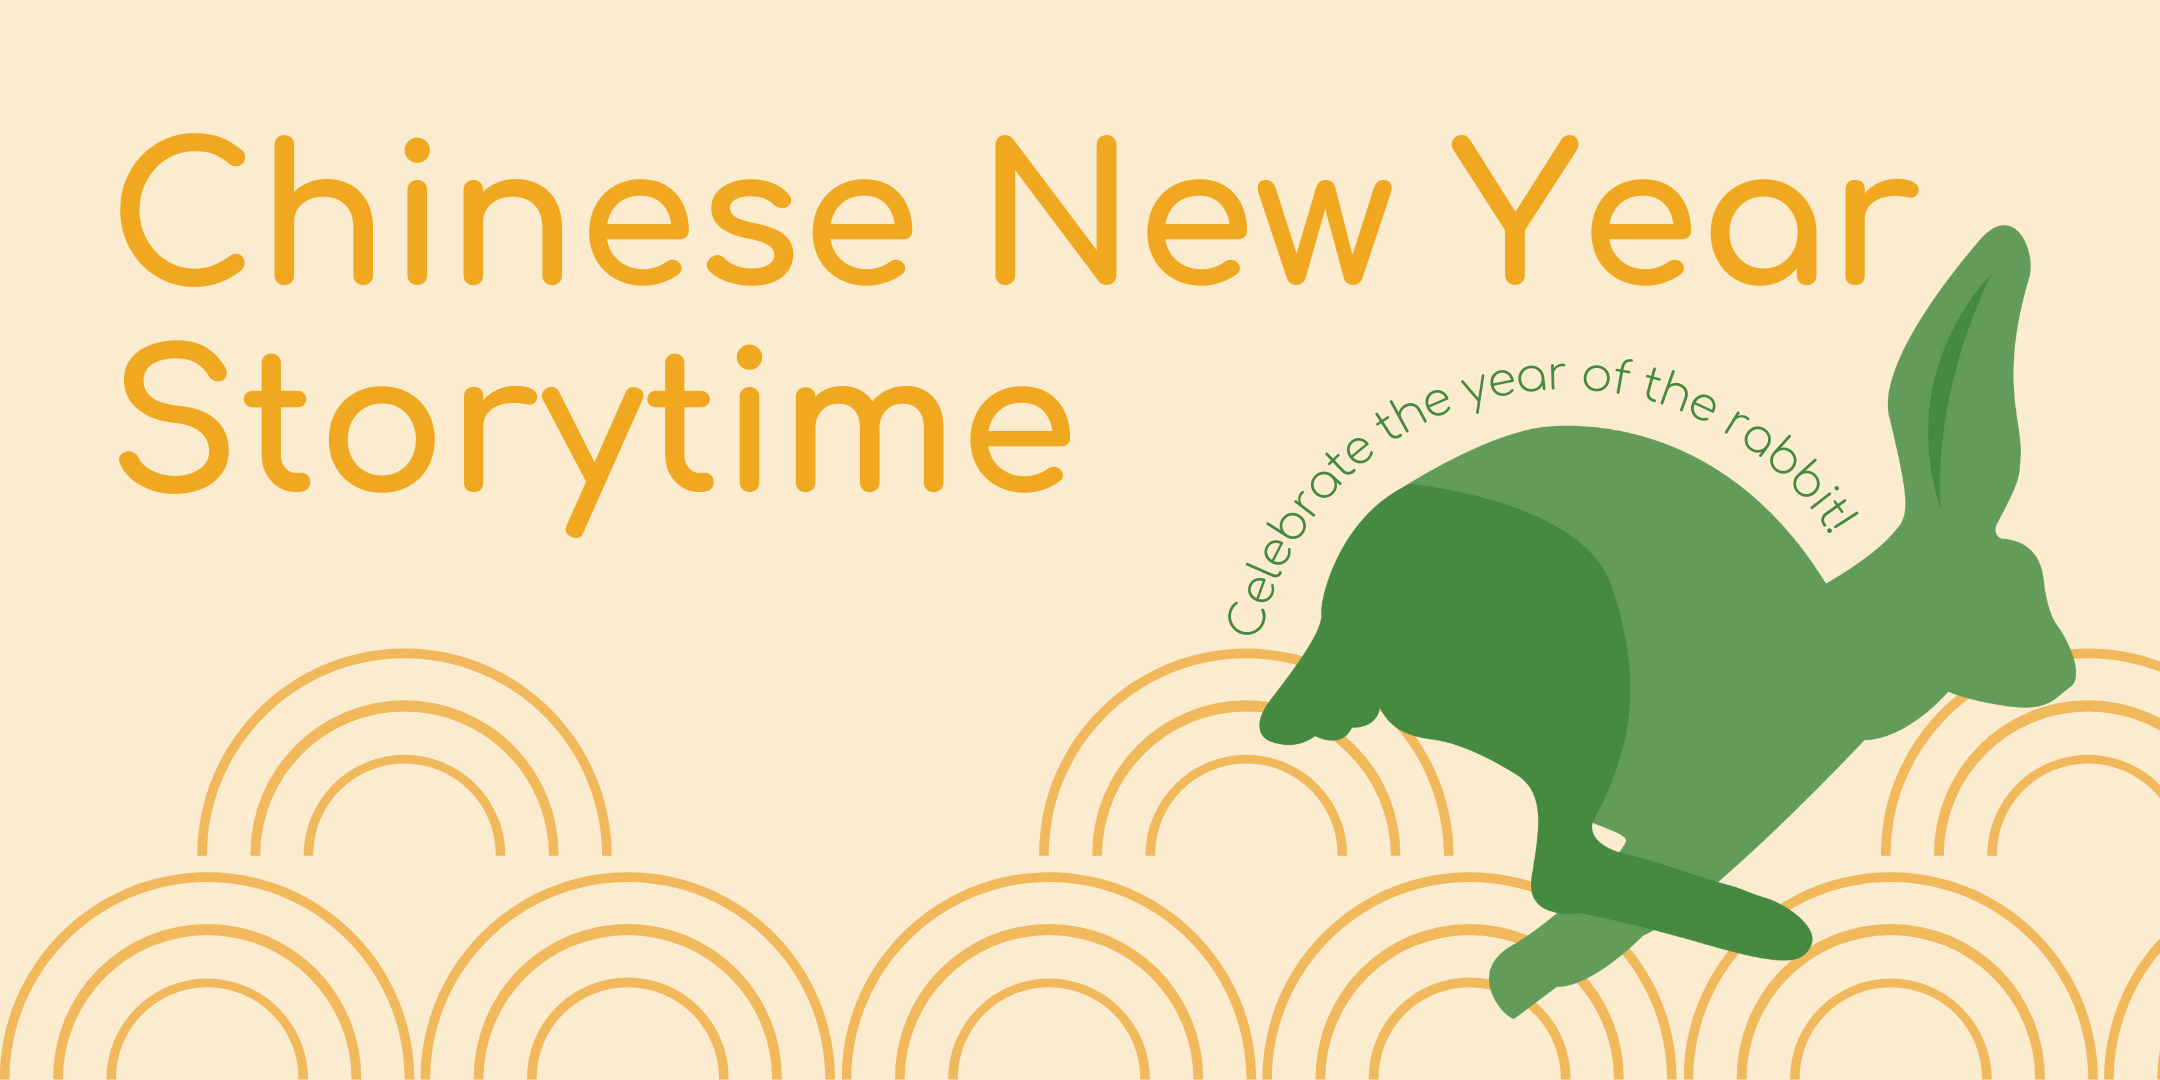 image of "Chinese New Year Storytime"